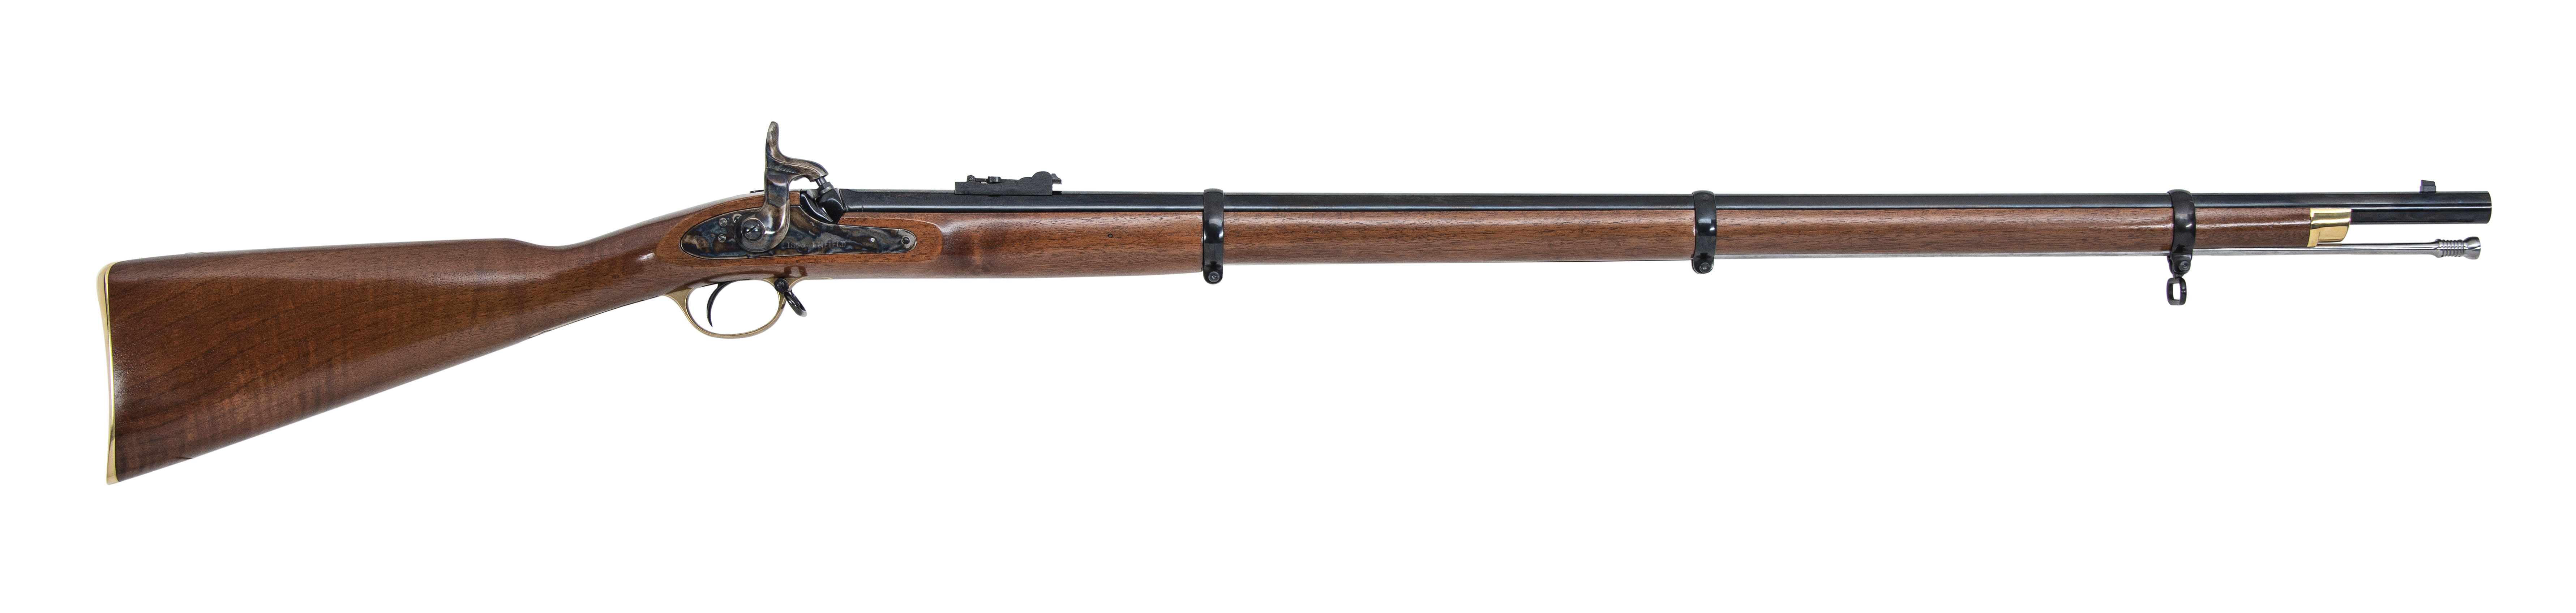 1853 Enfield Musket Rifle .58 Cal Rifled R185303